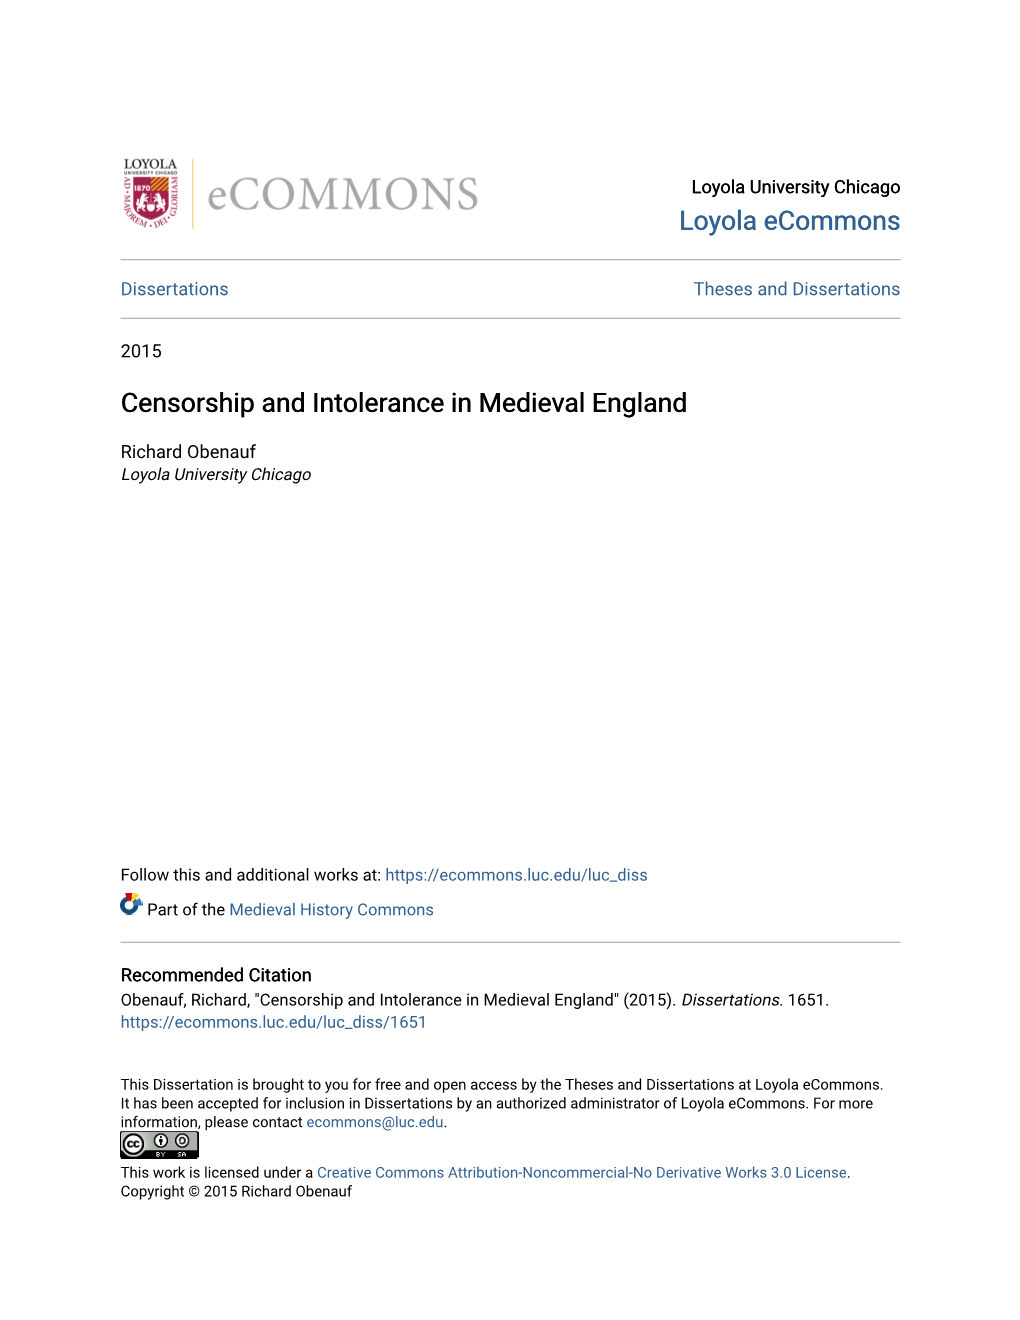 Censorship and Intolerance in Medieval England